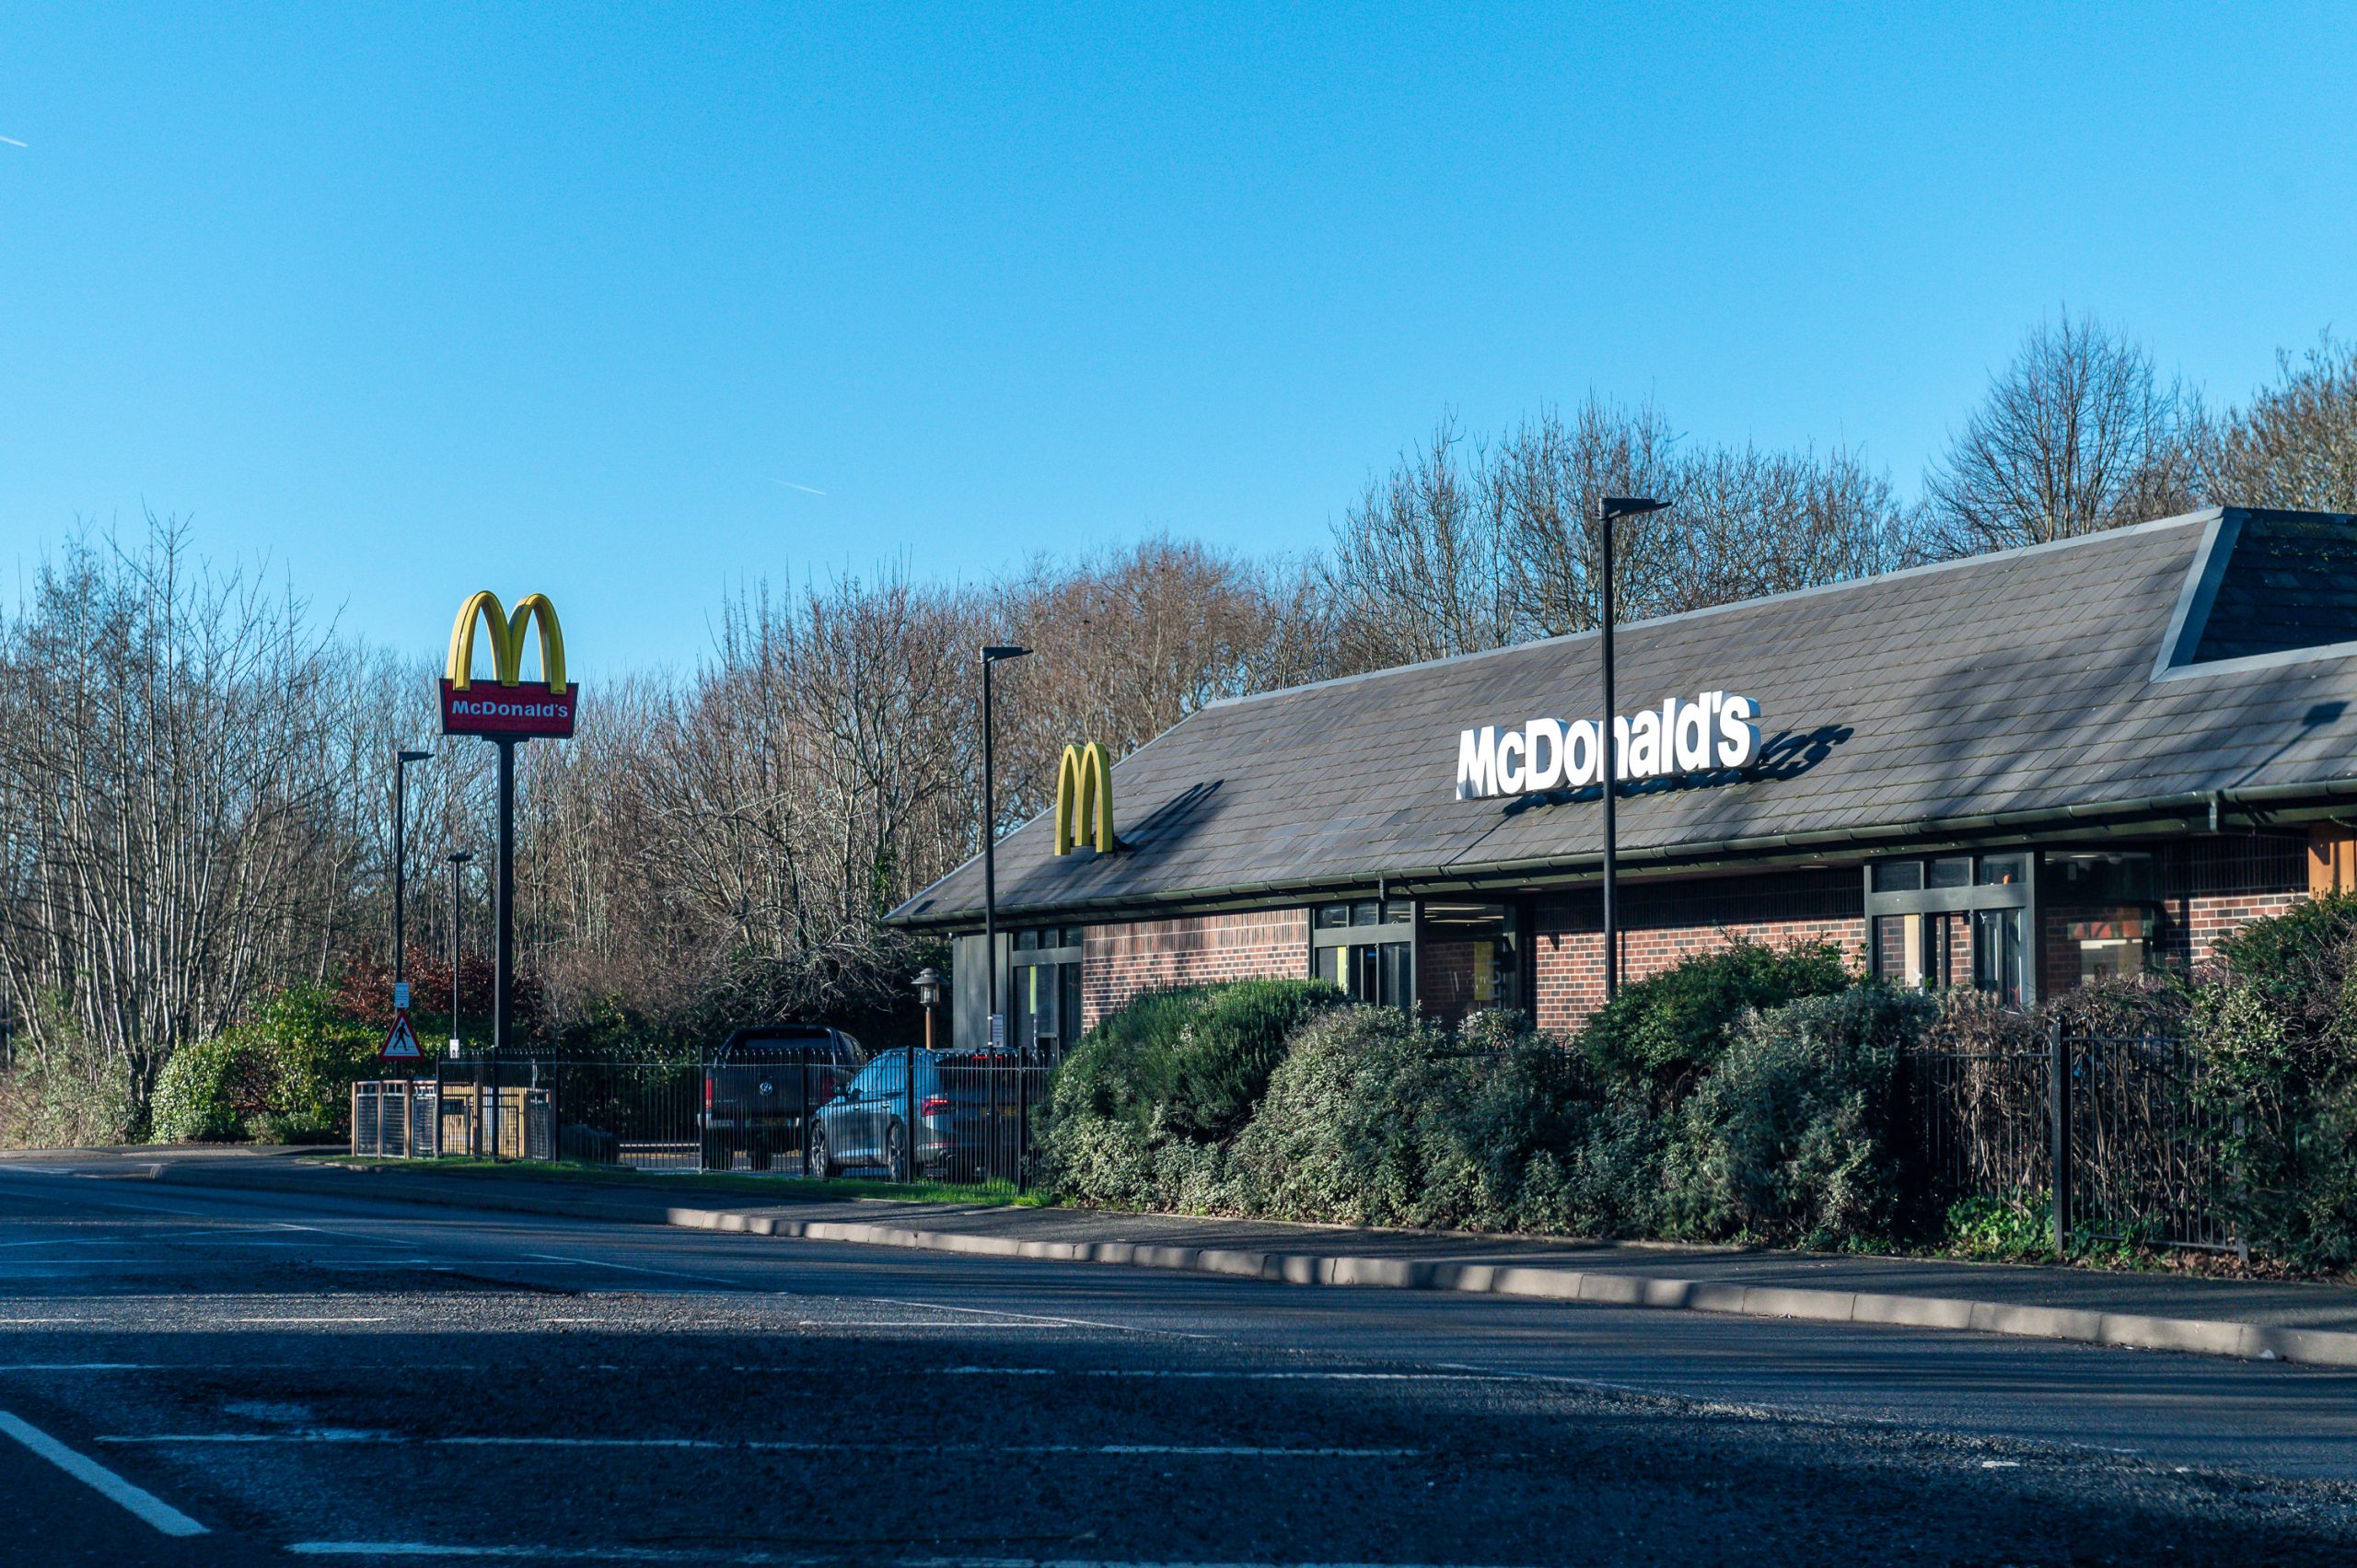 NEWS | People in Herefordshire wanted to test Greggs and McDonald’s takeaways with £1,000 salary for one-month role